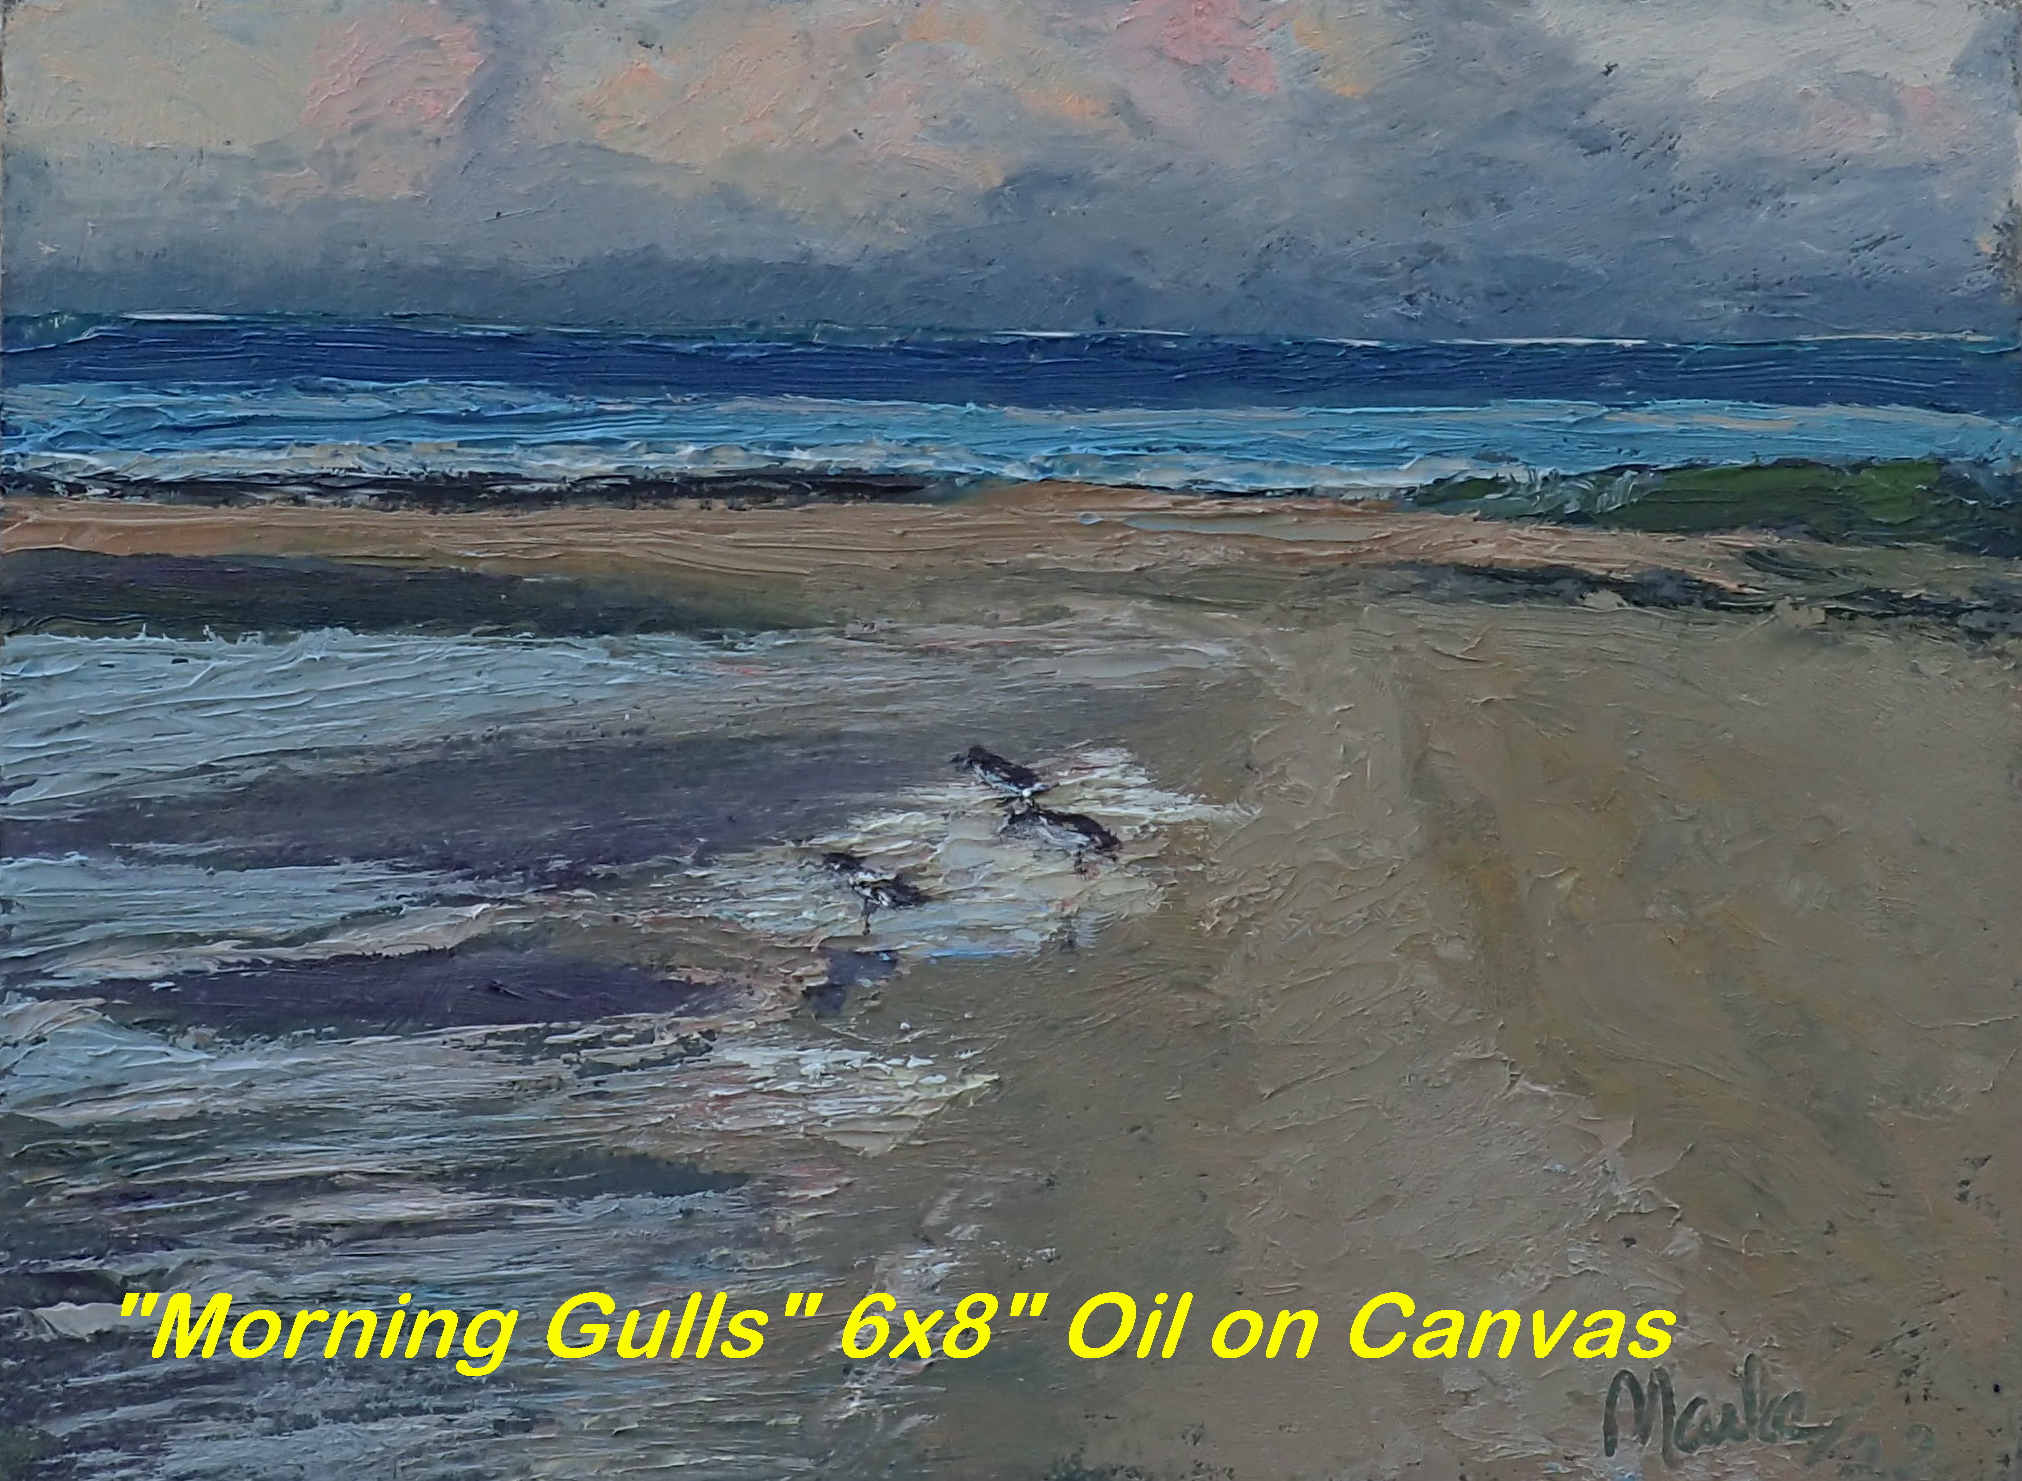 8x6" oil painting on canvas     An early morning mood captures the hunting seagulls before the tide flows in.